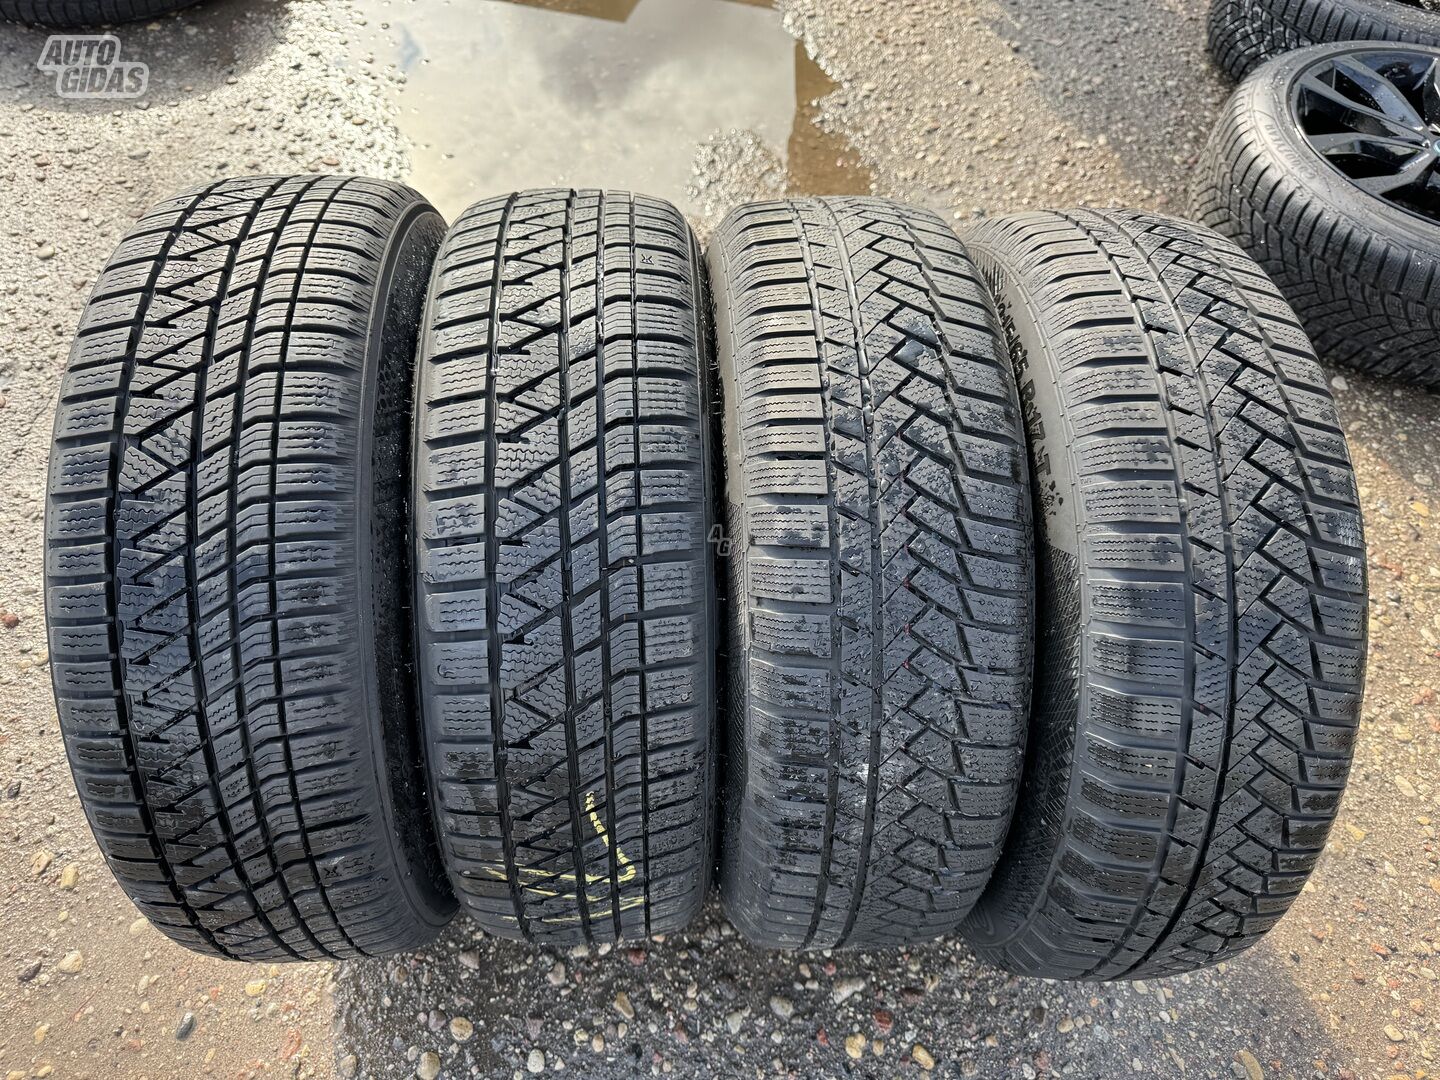 Continental Siunciam, 6-7mm 2019 R17 universal tyres passanger car